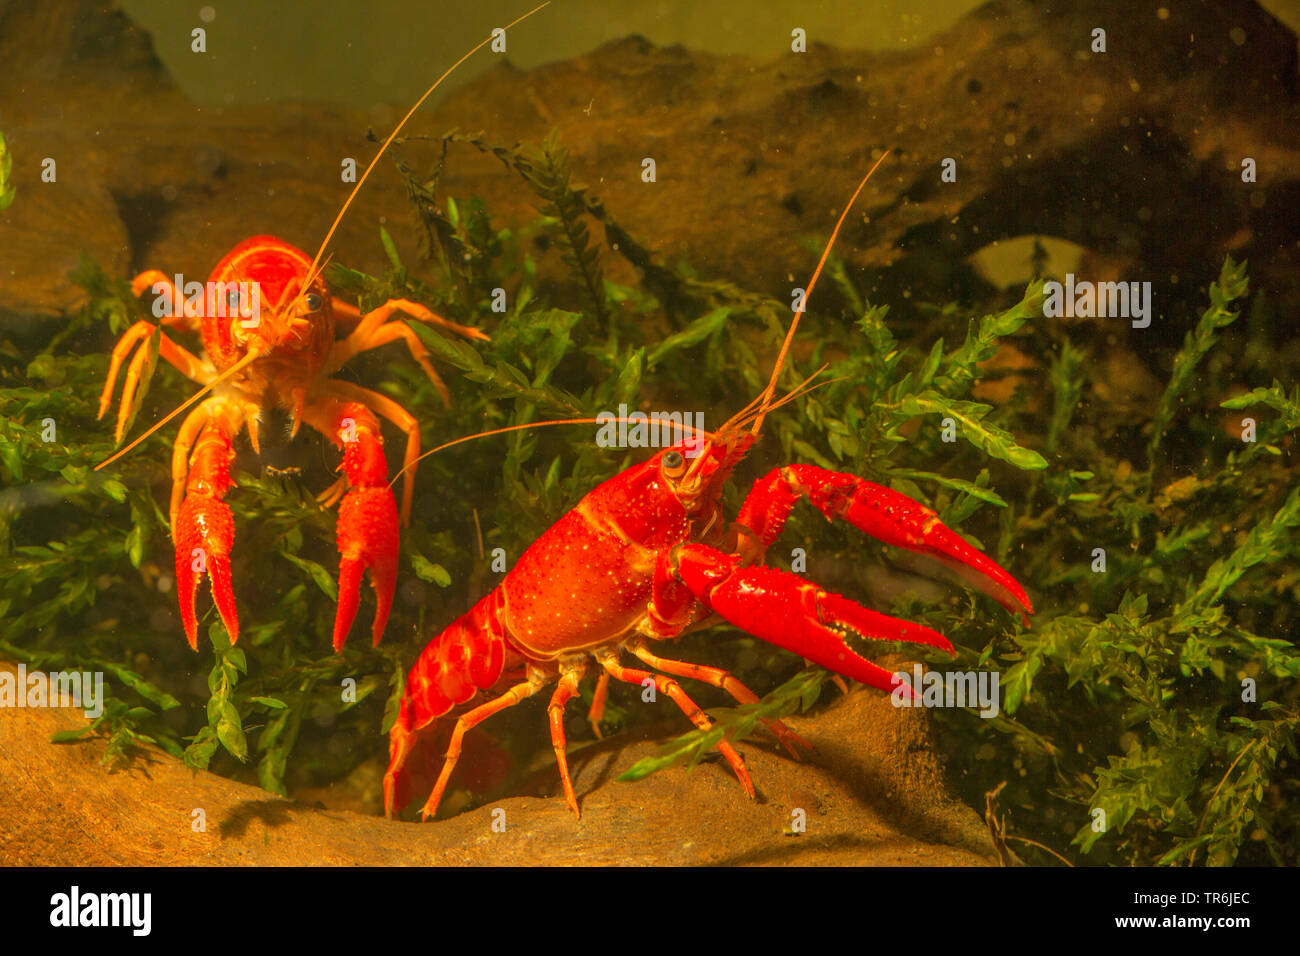 Louisiana red crayfish, red swamp crayfish, Louisiana swamp crayfish, red crayfish (Procambarus clarkii), male and female, Germany Stock Photo